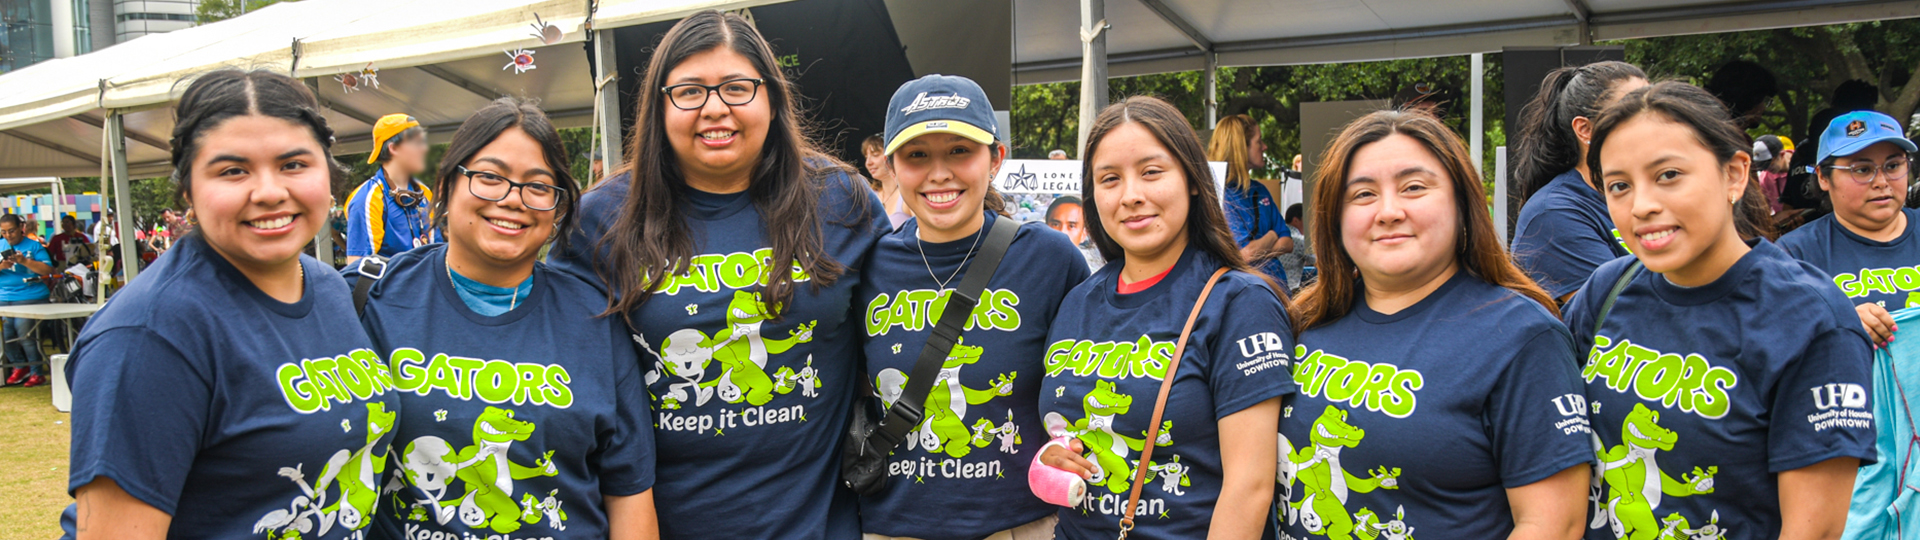 Urban Education Students Volunteered for Earth Day 